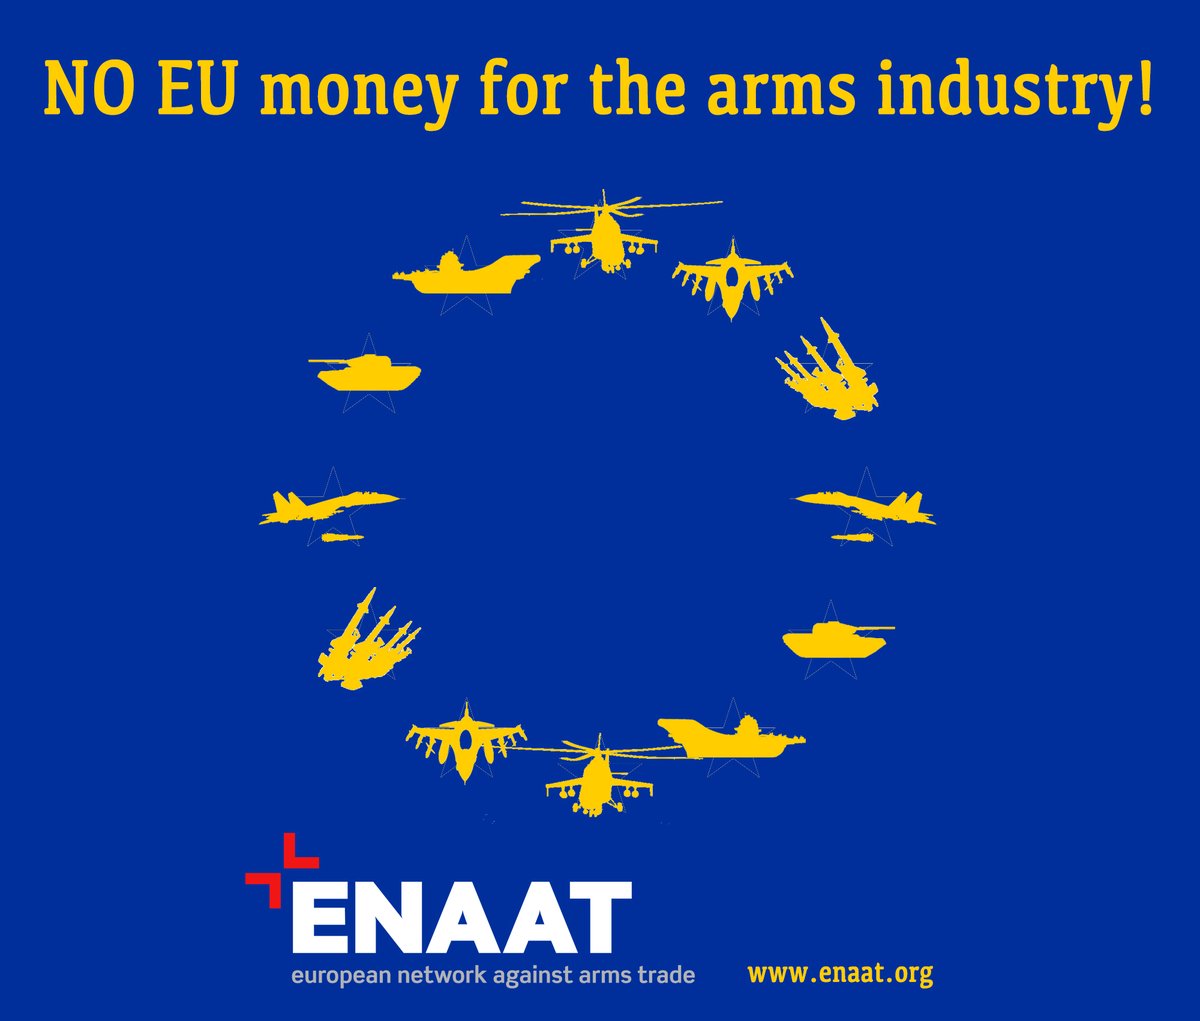 ENAAT alerts Euro-parliamentarians about the risks the European Defence Fund entails